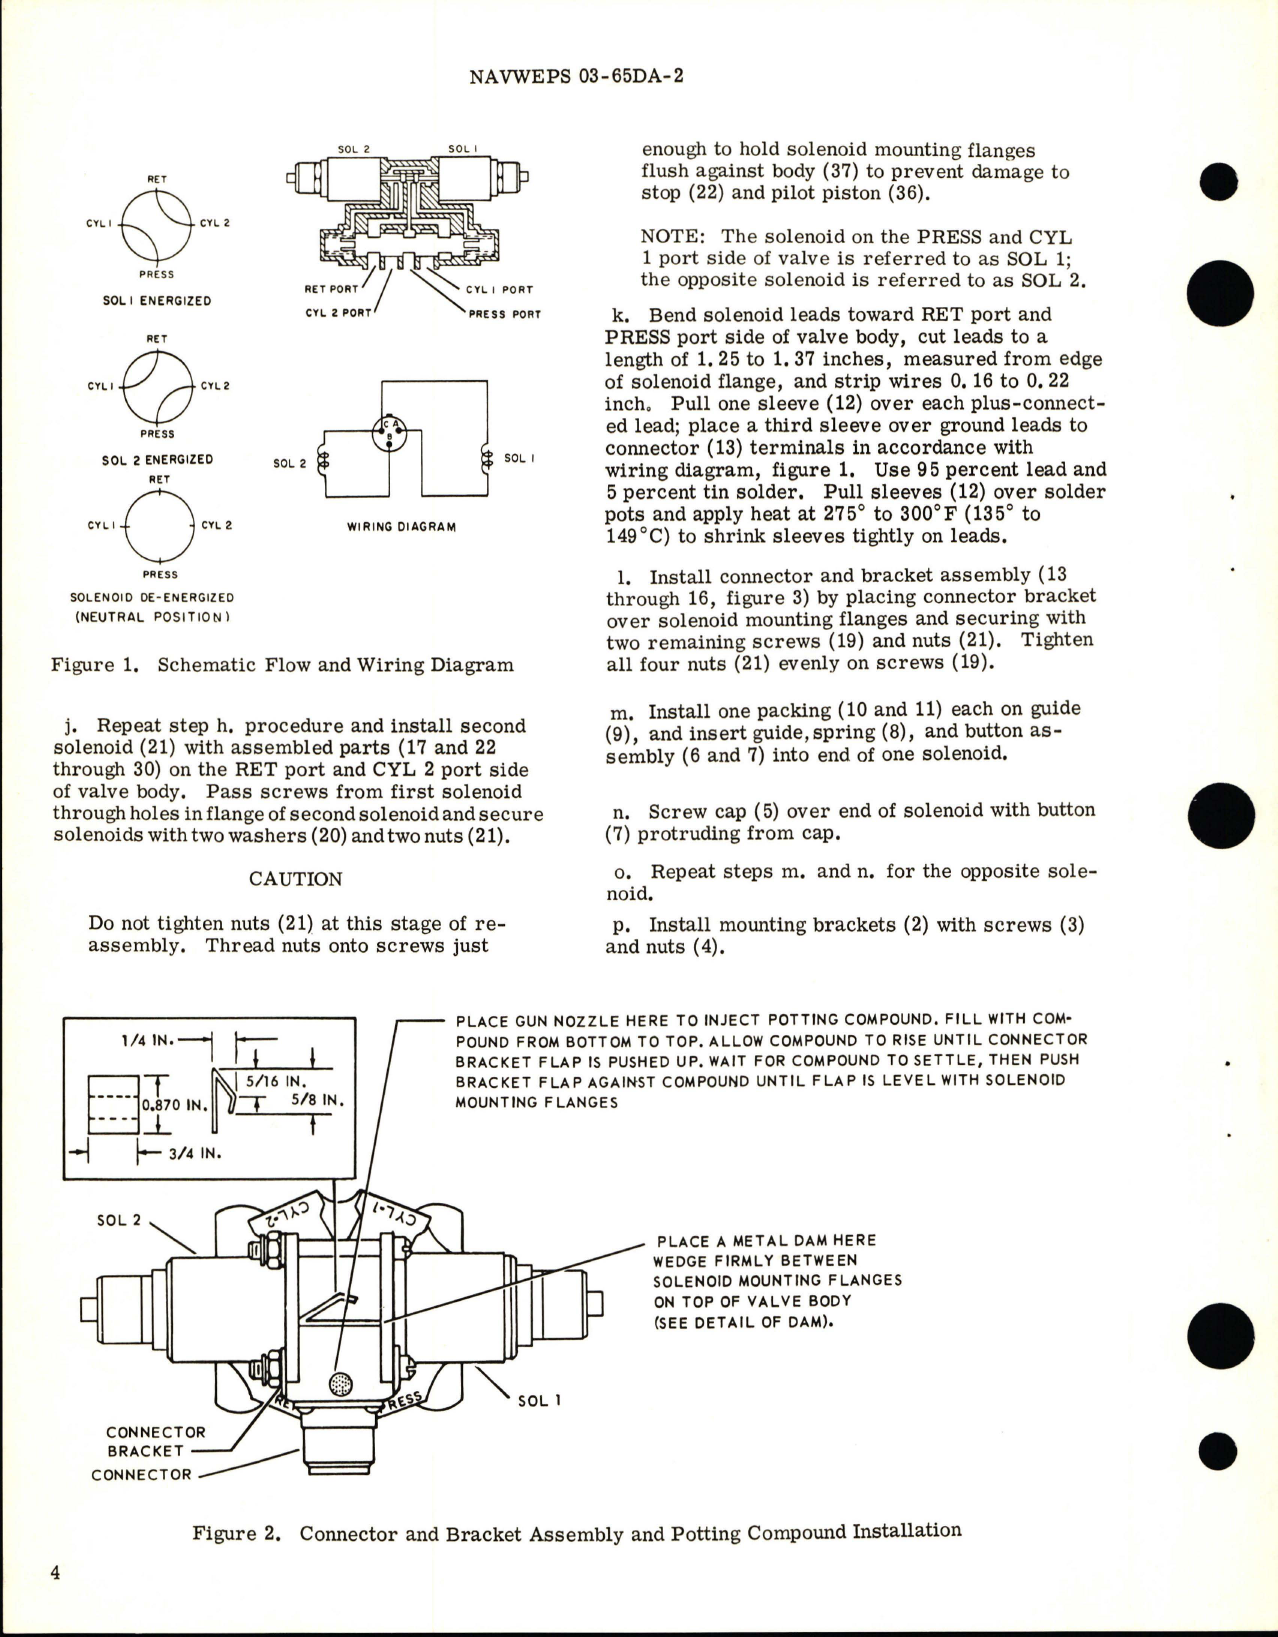 Sample page 6 from AirCorps Library document: Overhaul Instructions with Illustrated Parts Breakdown for Directional Control Valve Assembly - 70961-1